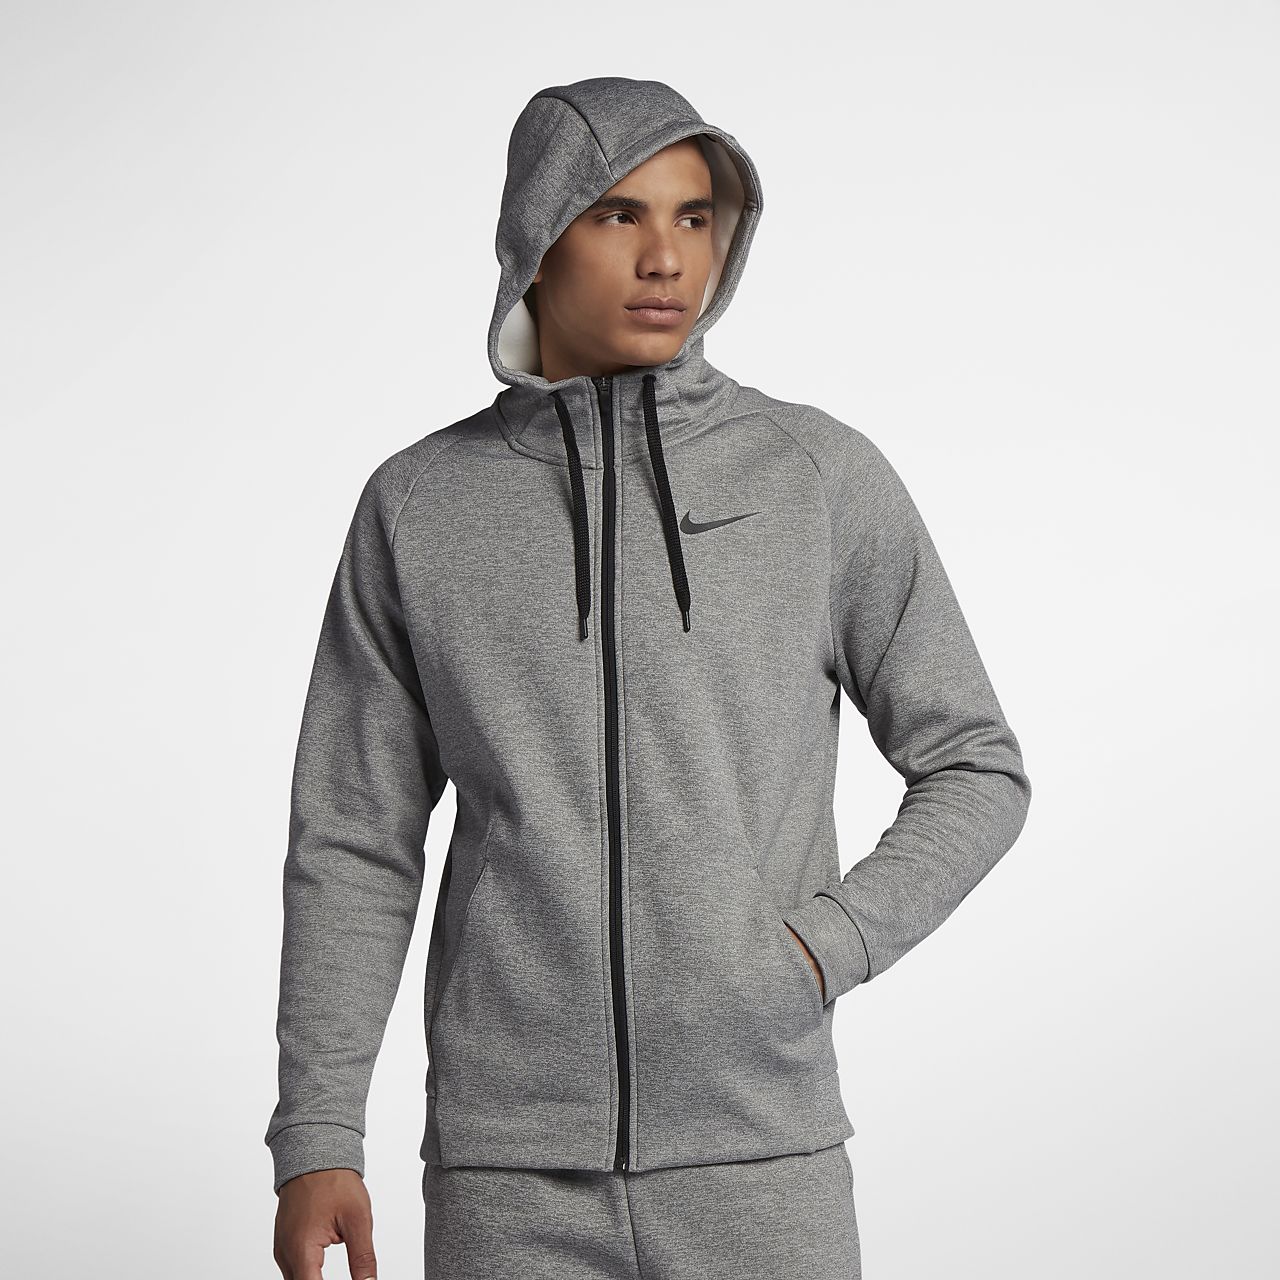 nike fit therma